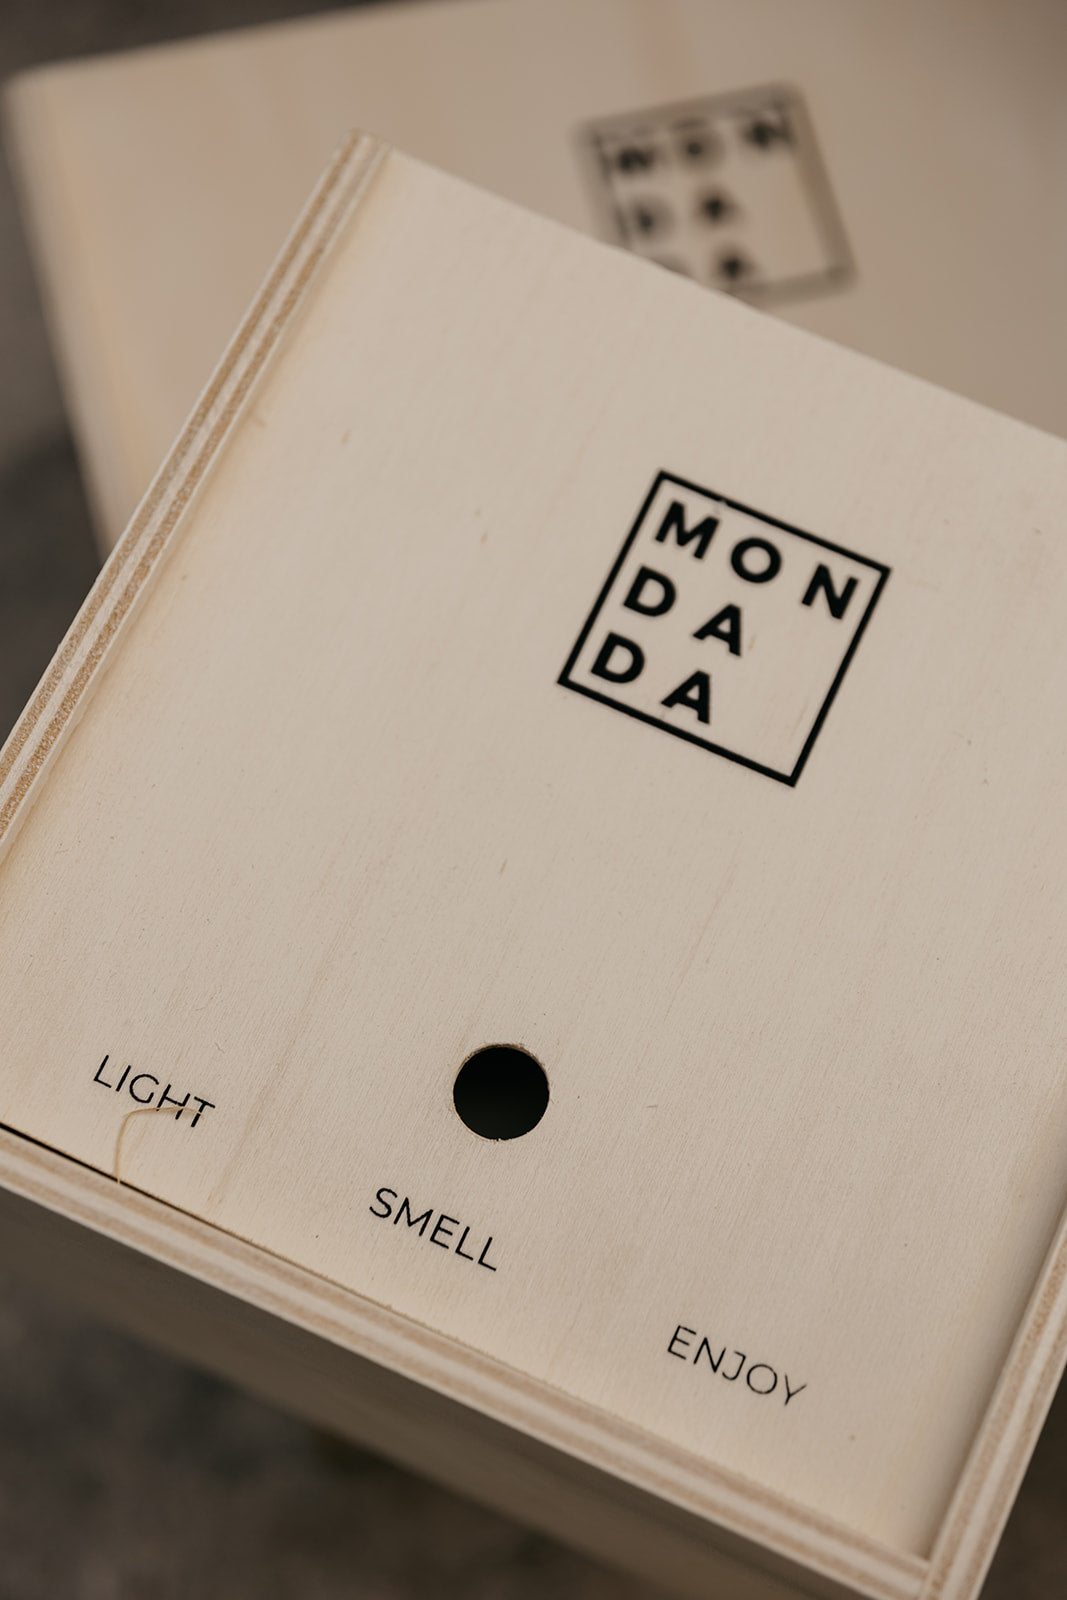 Mon Dada gift boxes, in which candles are packed. On the box is written "Mon Dada", and "light, smell, enjoy".